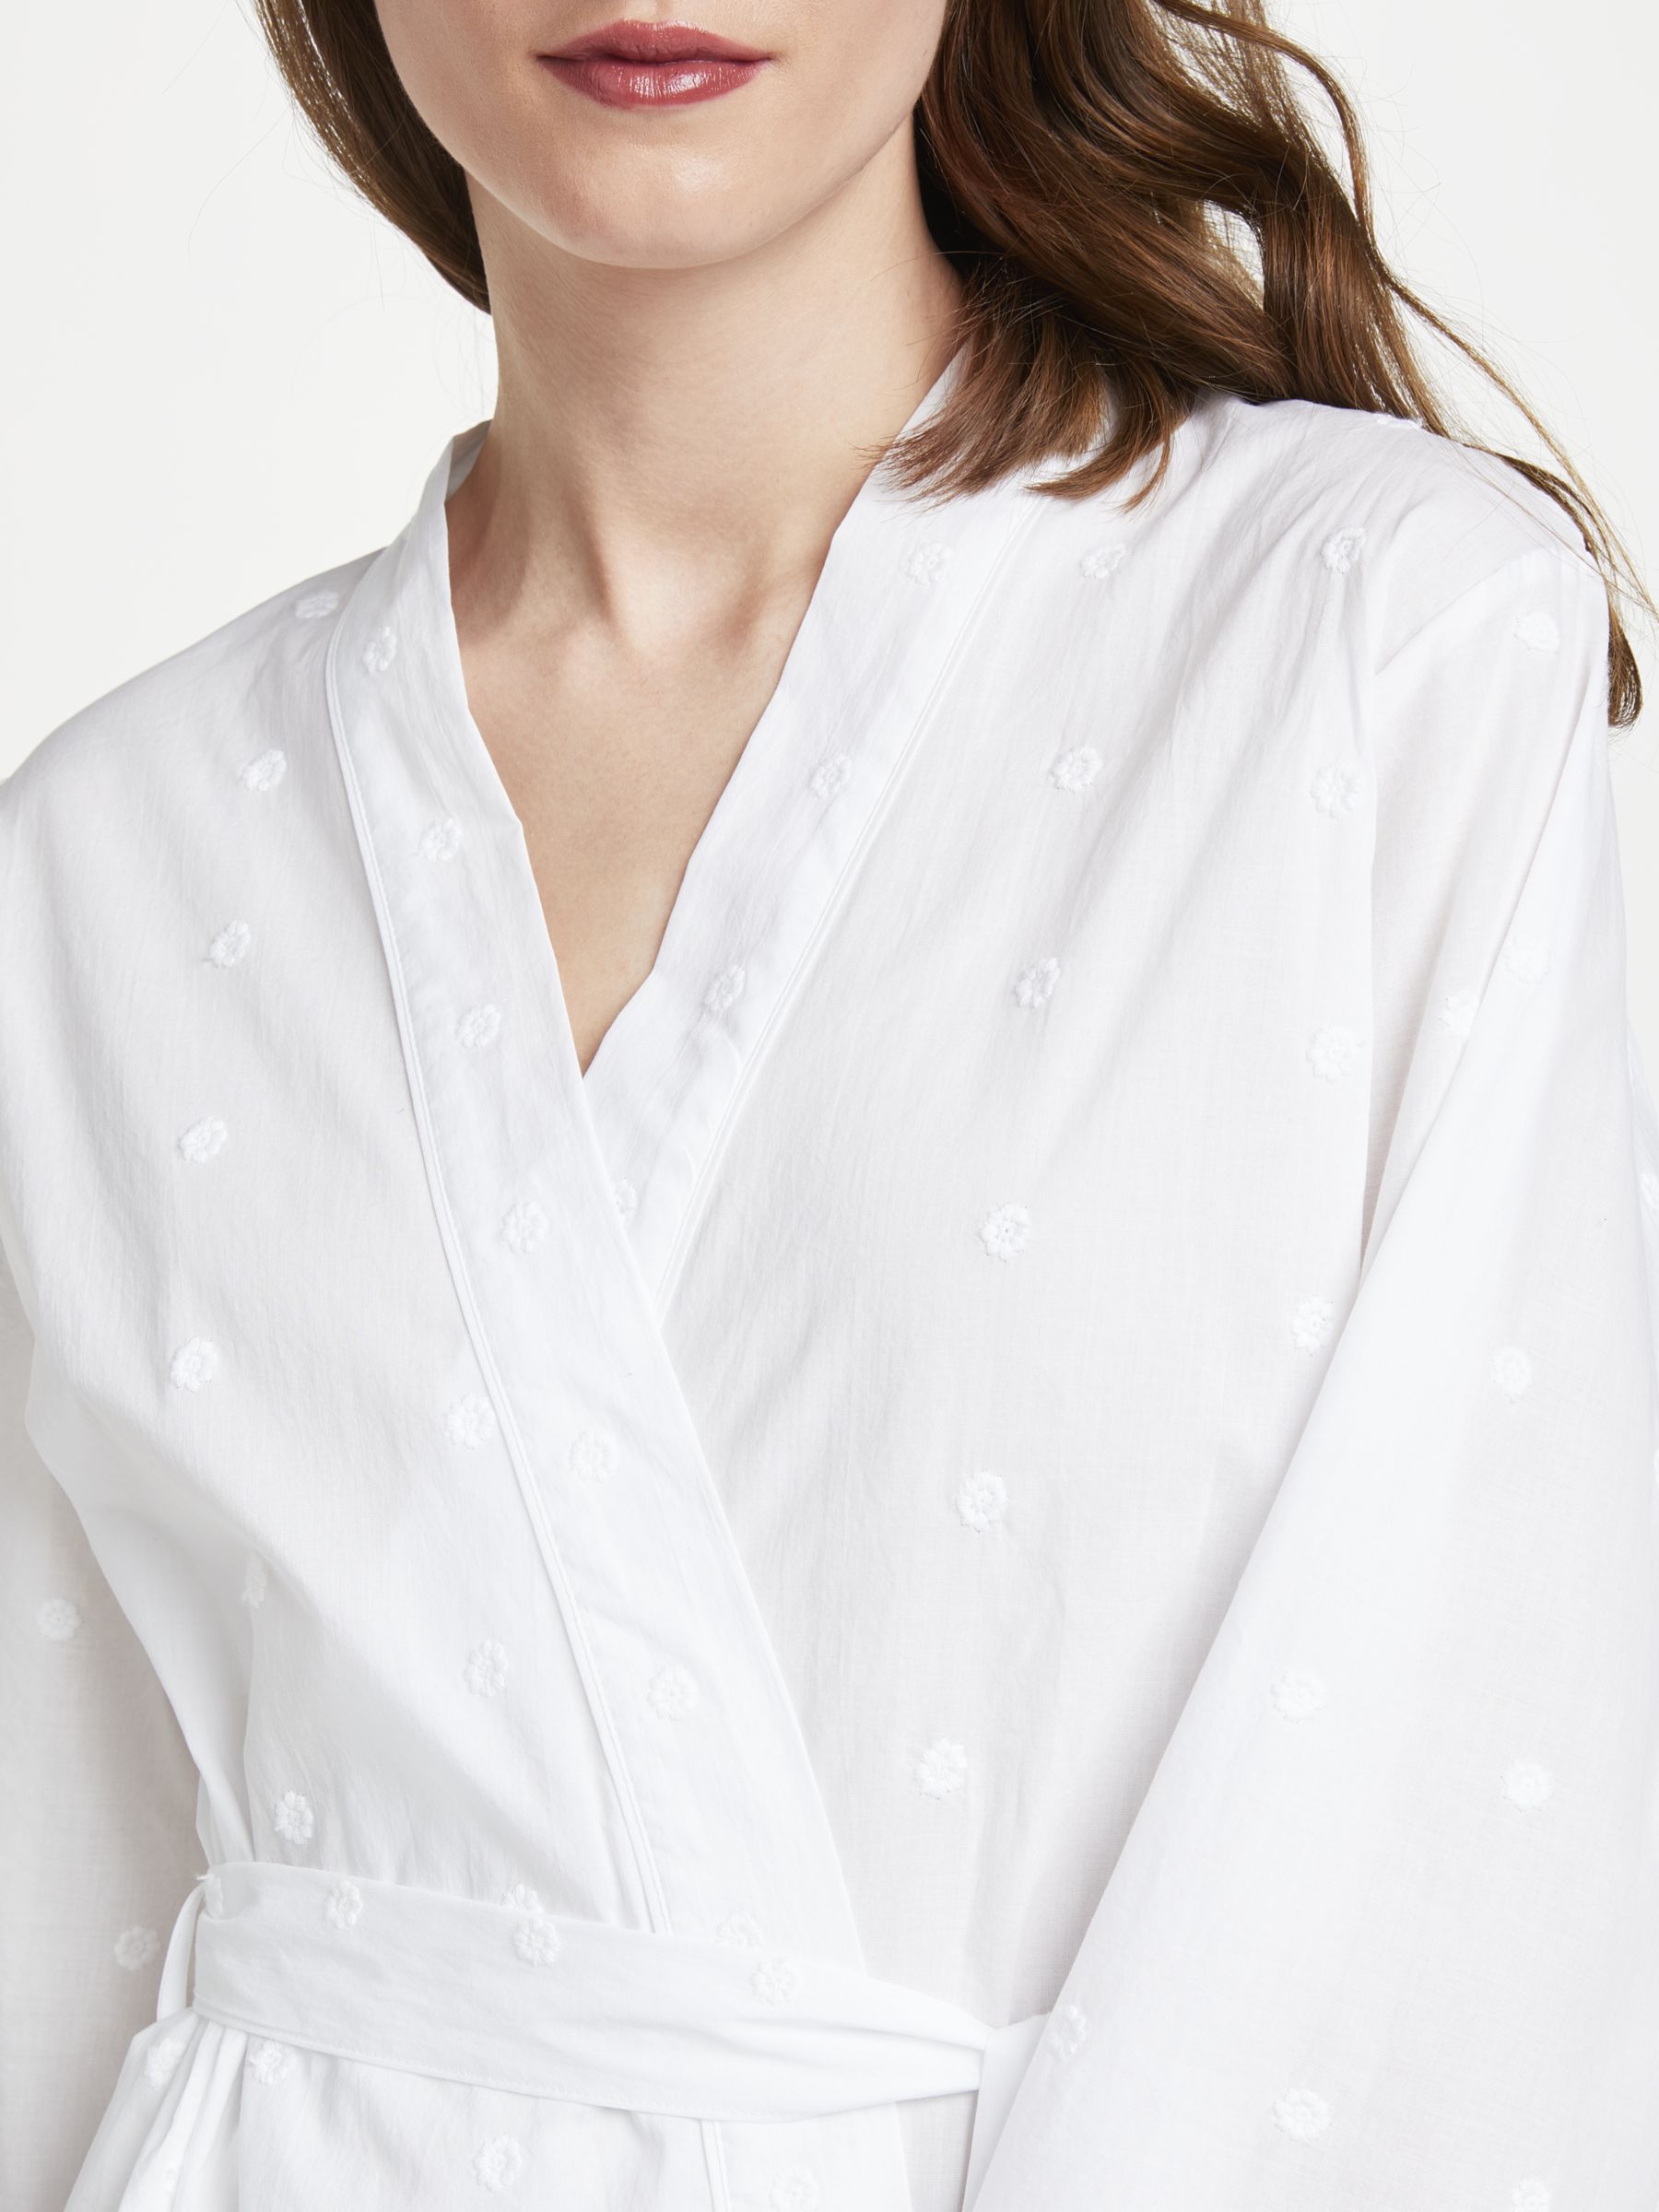 John Lewis Partners Broderie Anglaise Cotton Dressing Gown White At John Lewis Partners